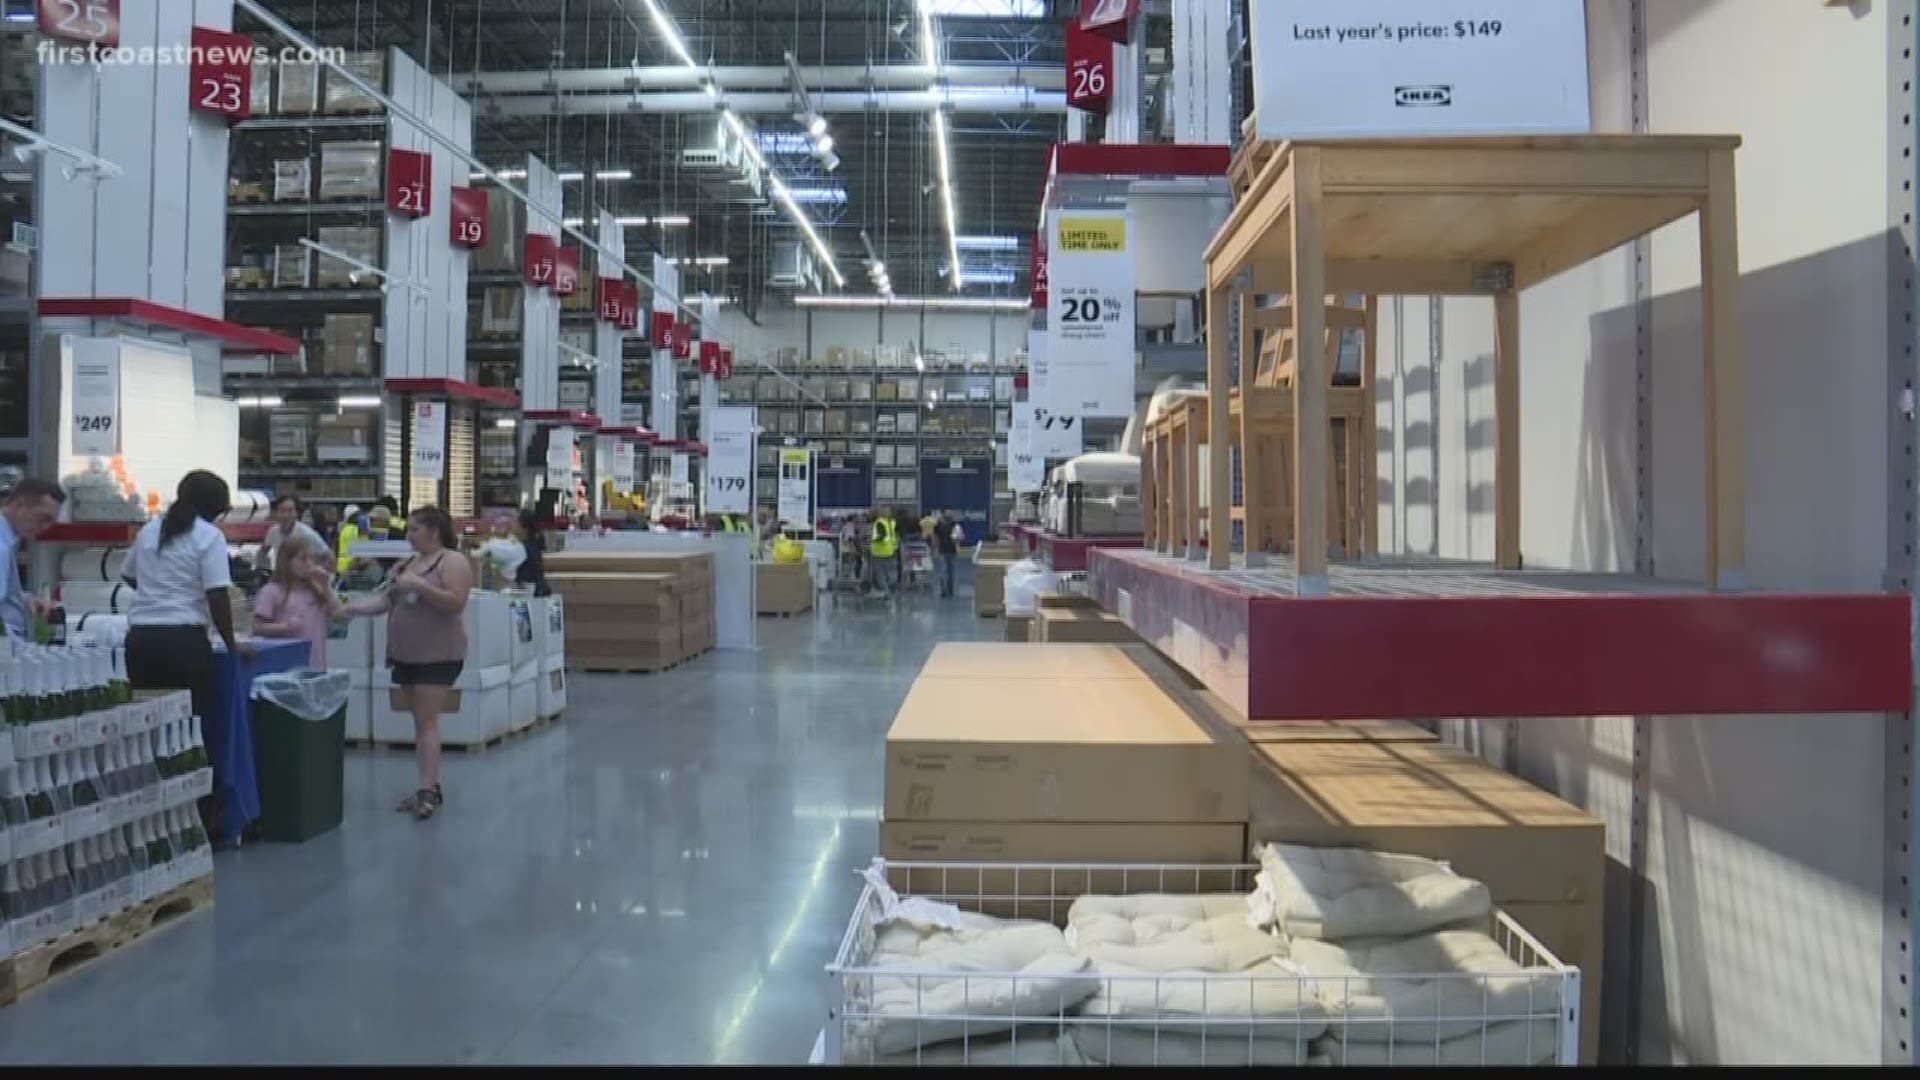 FCN reporter Nick Perrault went to the grand opening and compared prices to other stores.